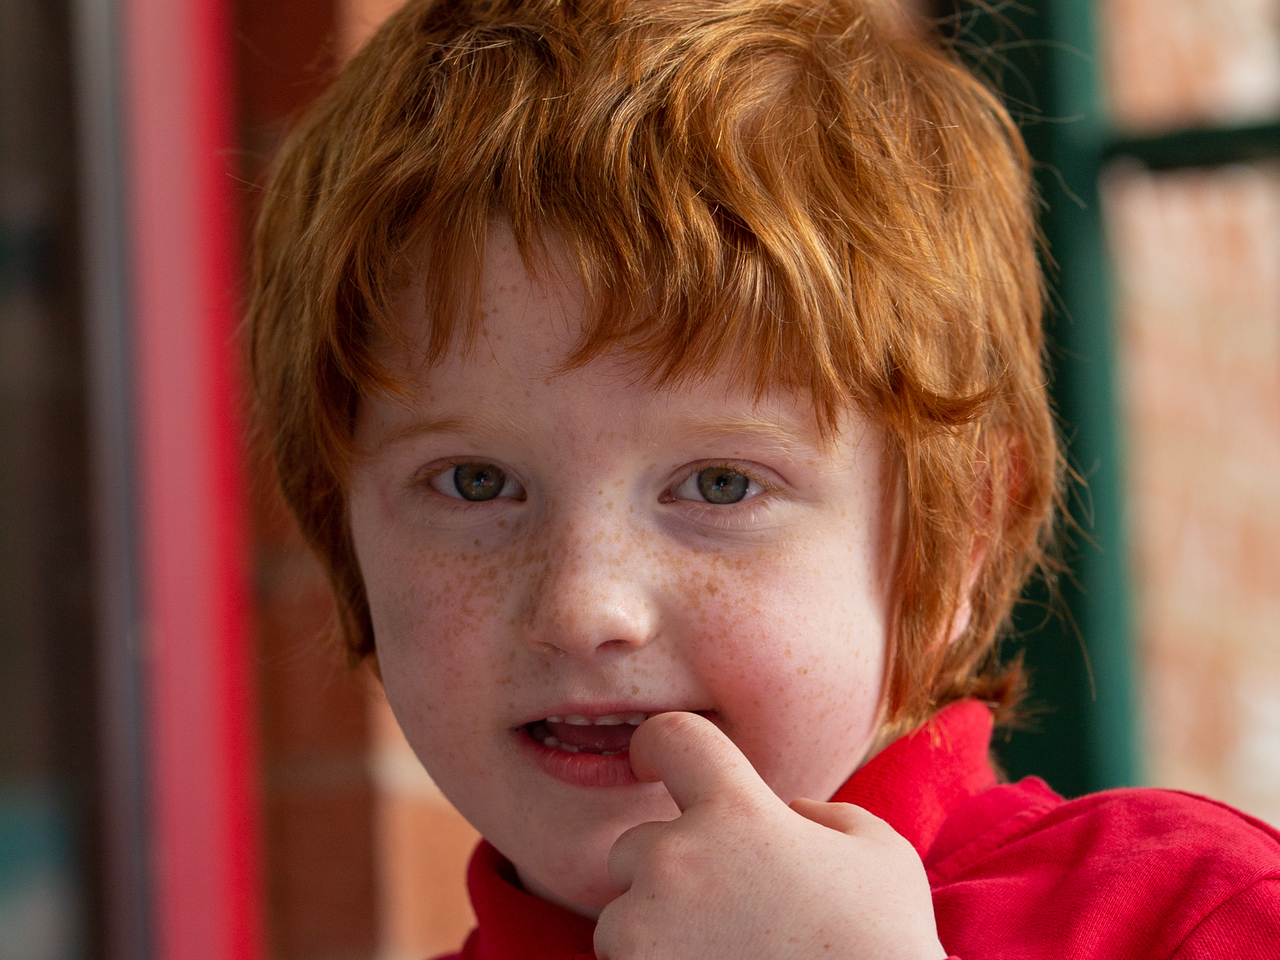 Young boy with learning disabilities school photo